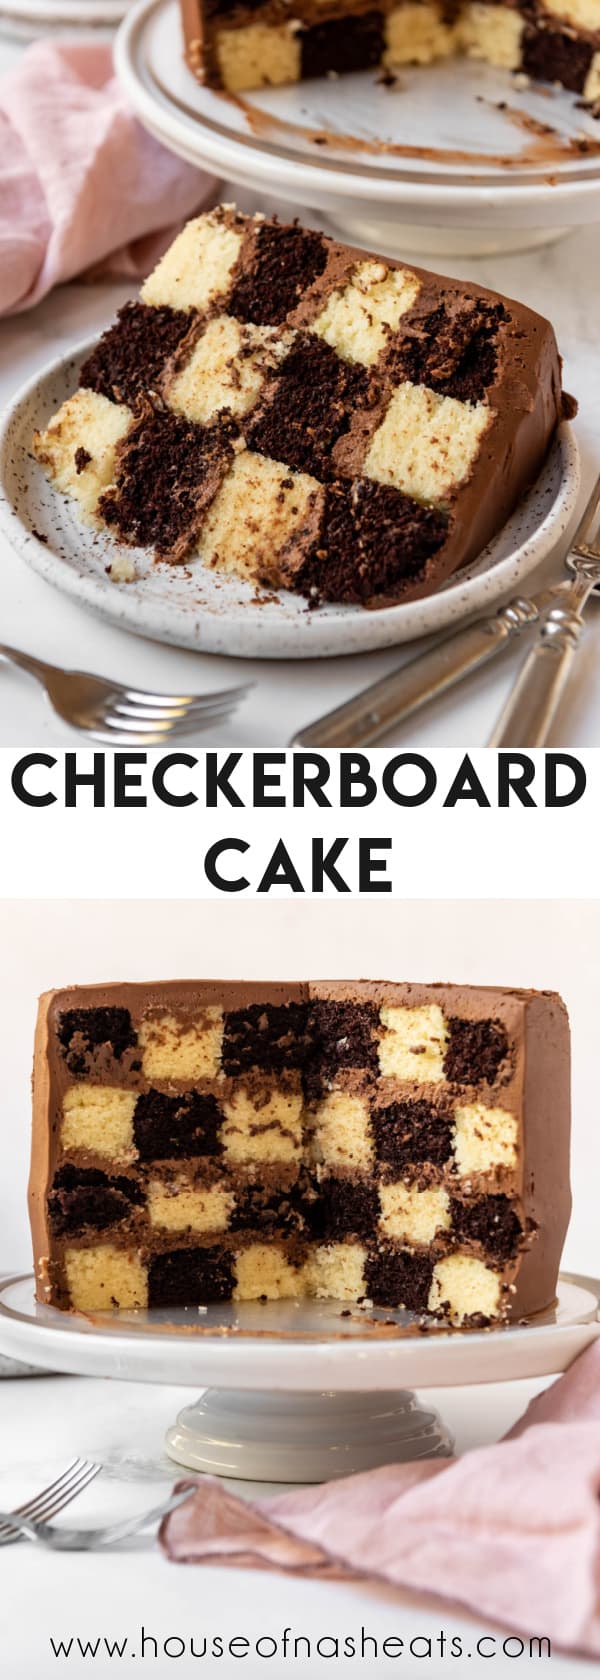 A collage of images of checkerboard cake with text overlay.